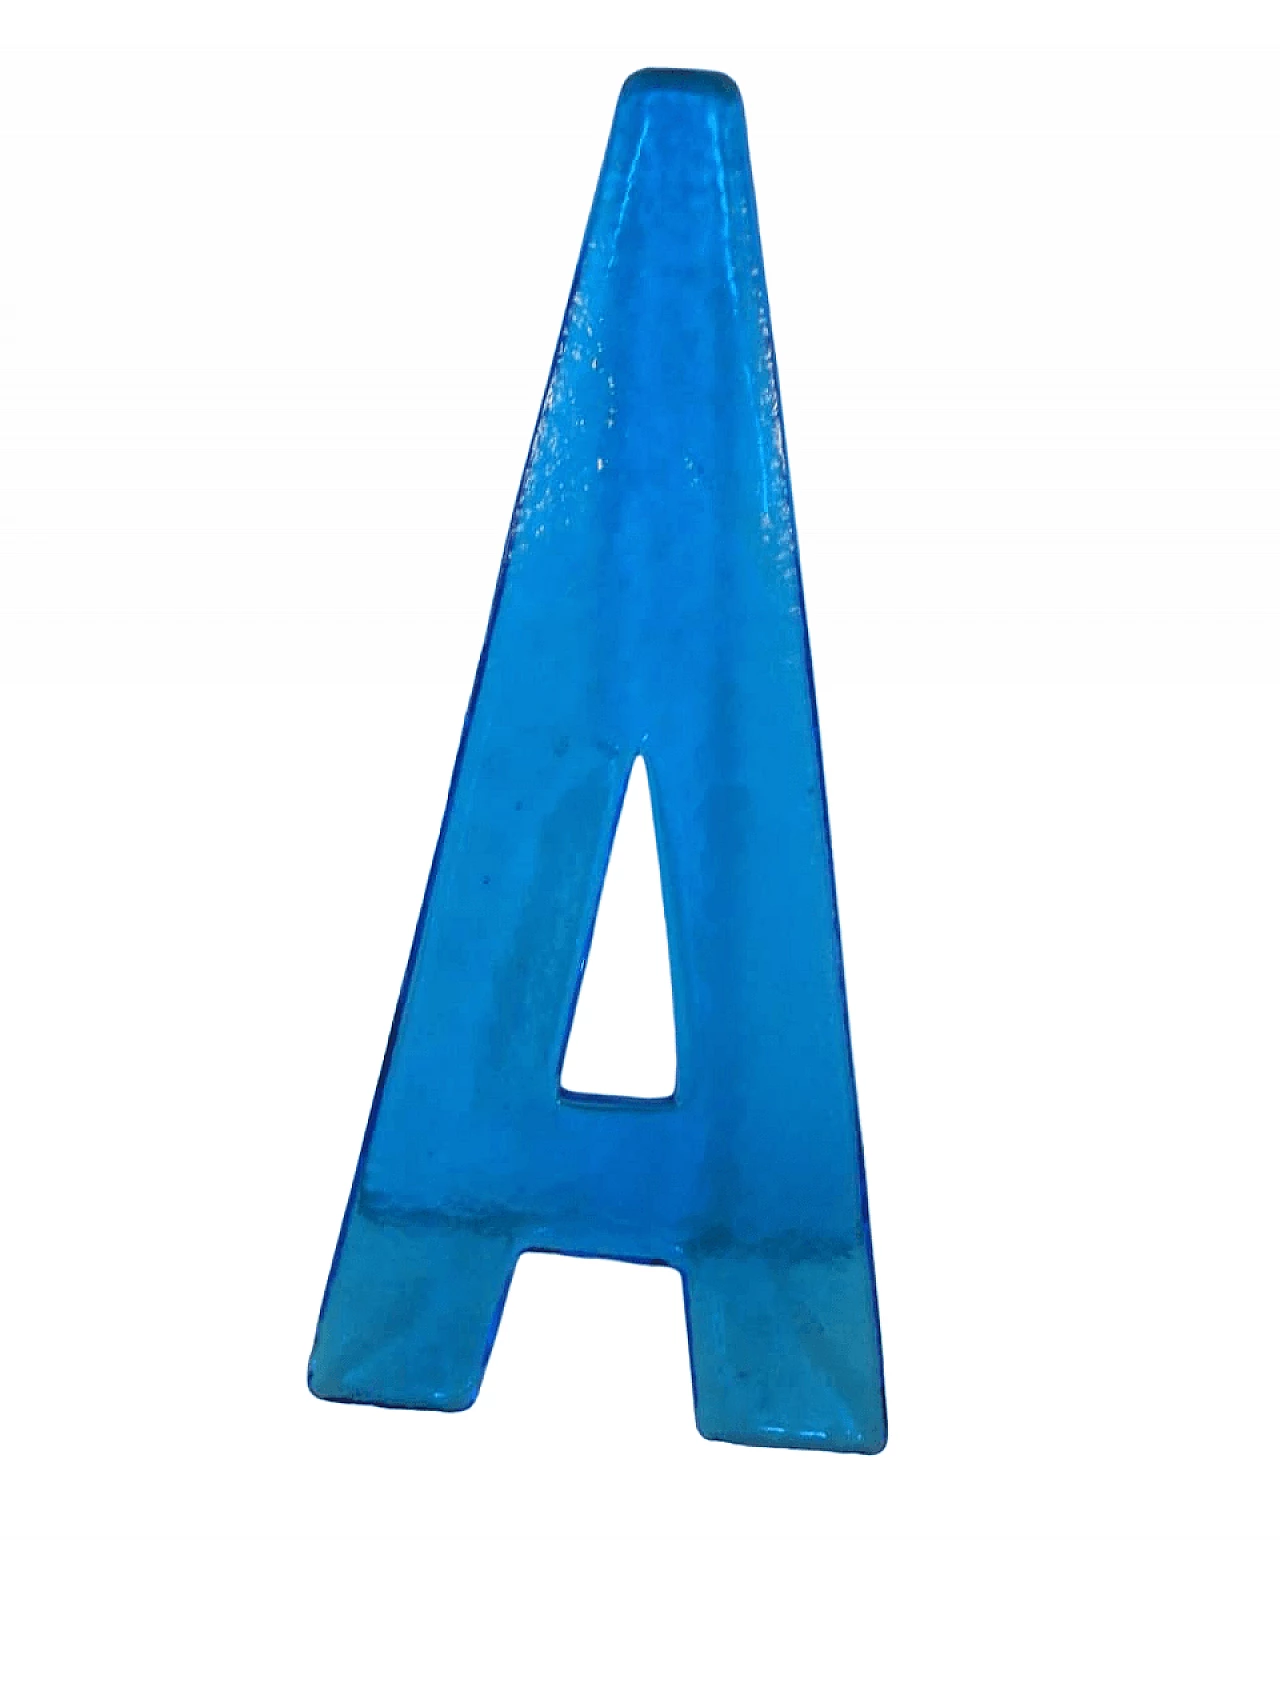 Blue glass letter A, 1980s 7